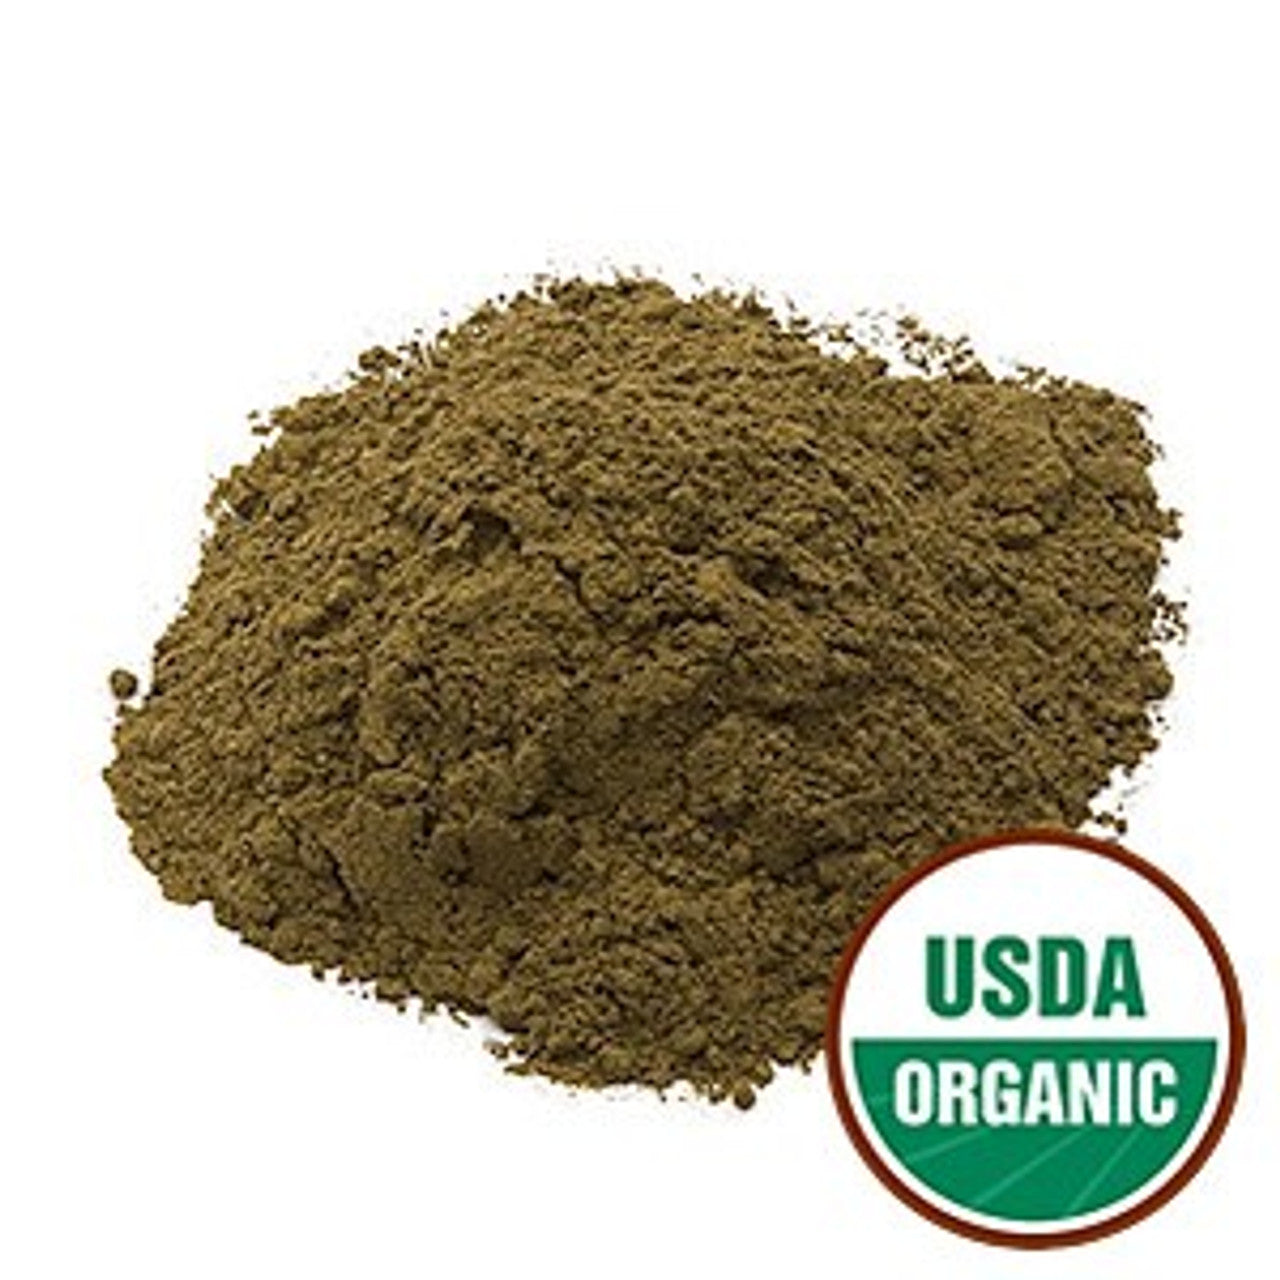 Basil (Ocimum basilicum) originates in India and is a very common culinary seasoning. In addition to its culinary uses, Basil also offers a variety of health supporting benefits.